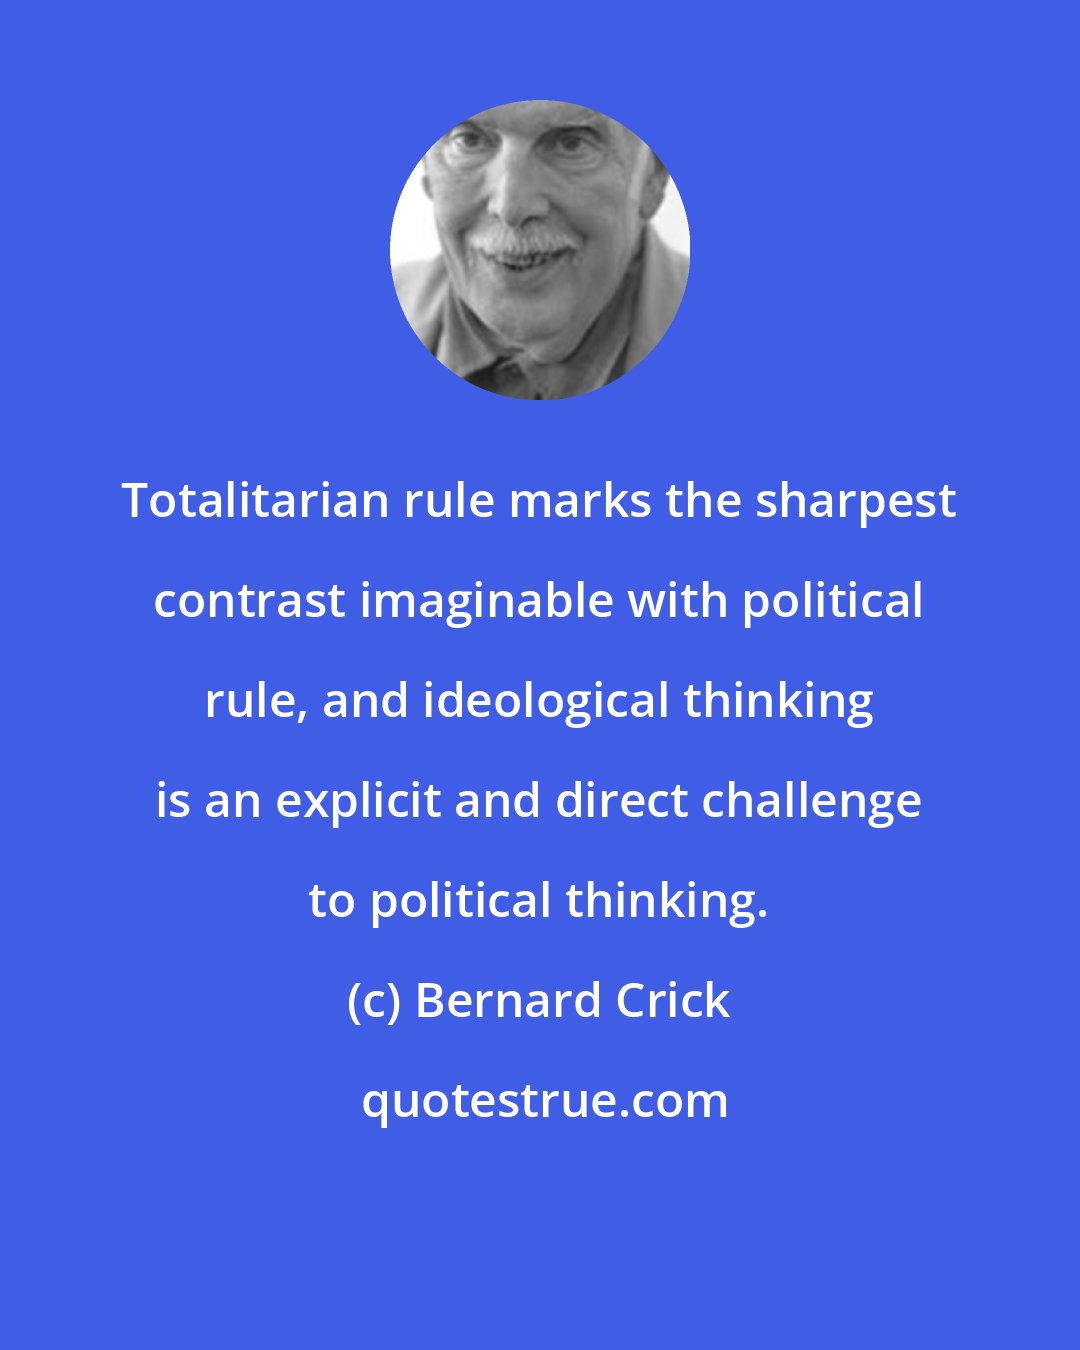 Bernard Crick: Totalitarian rule marks the sharpest contrast imaginable with political rule, and ideological thinking is an explicit and direct challenge to political thinking.